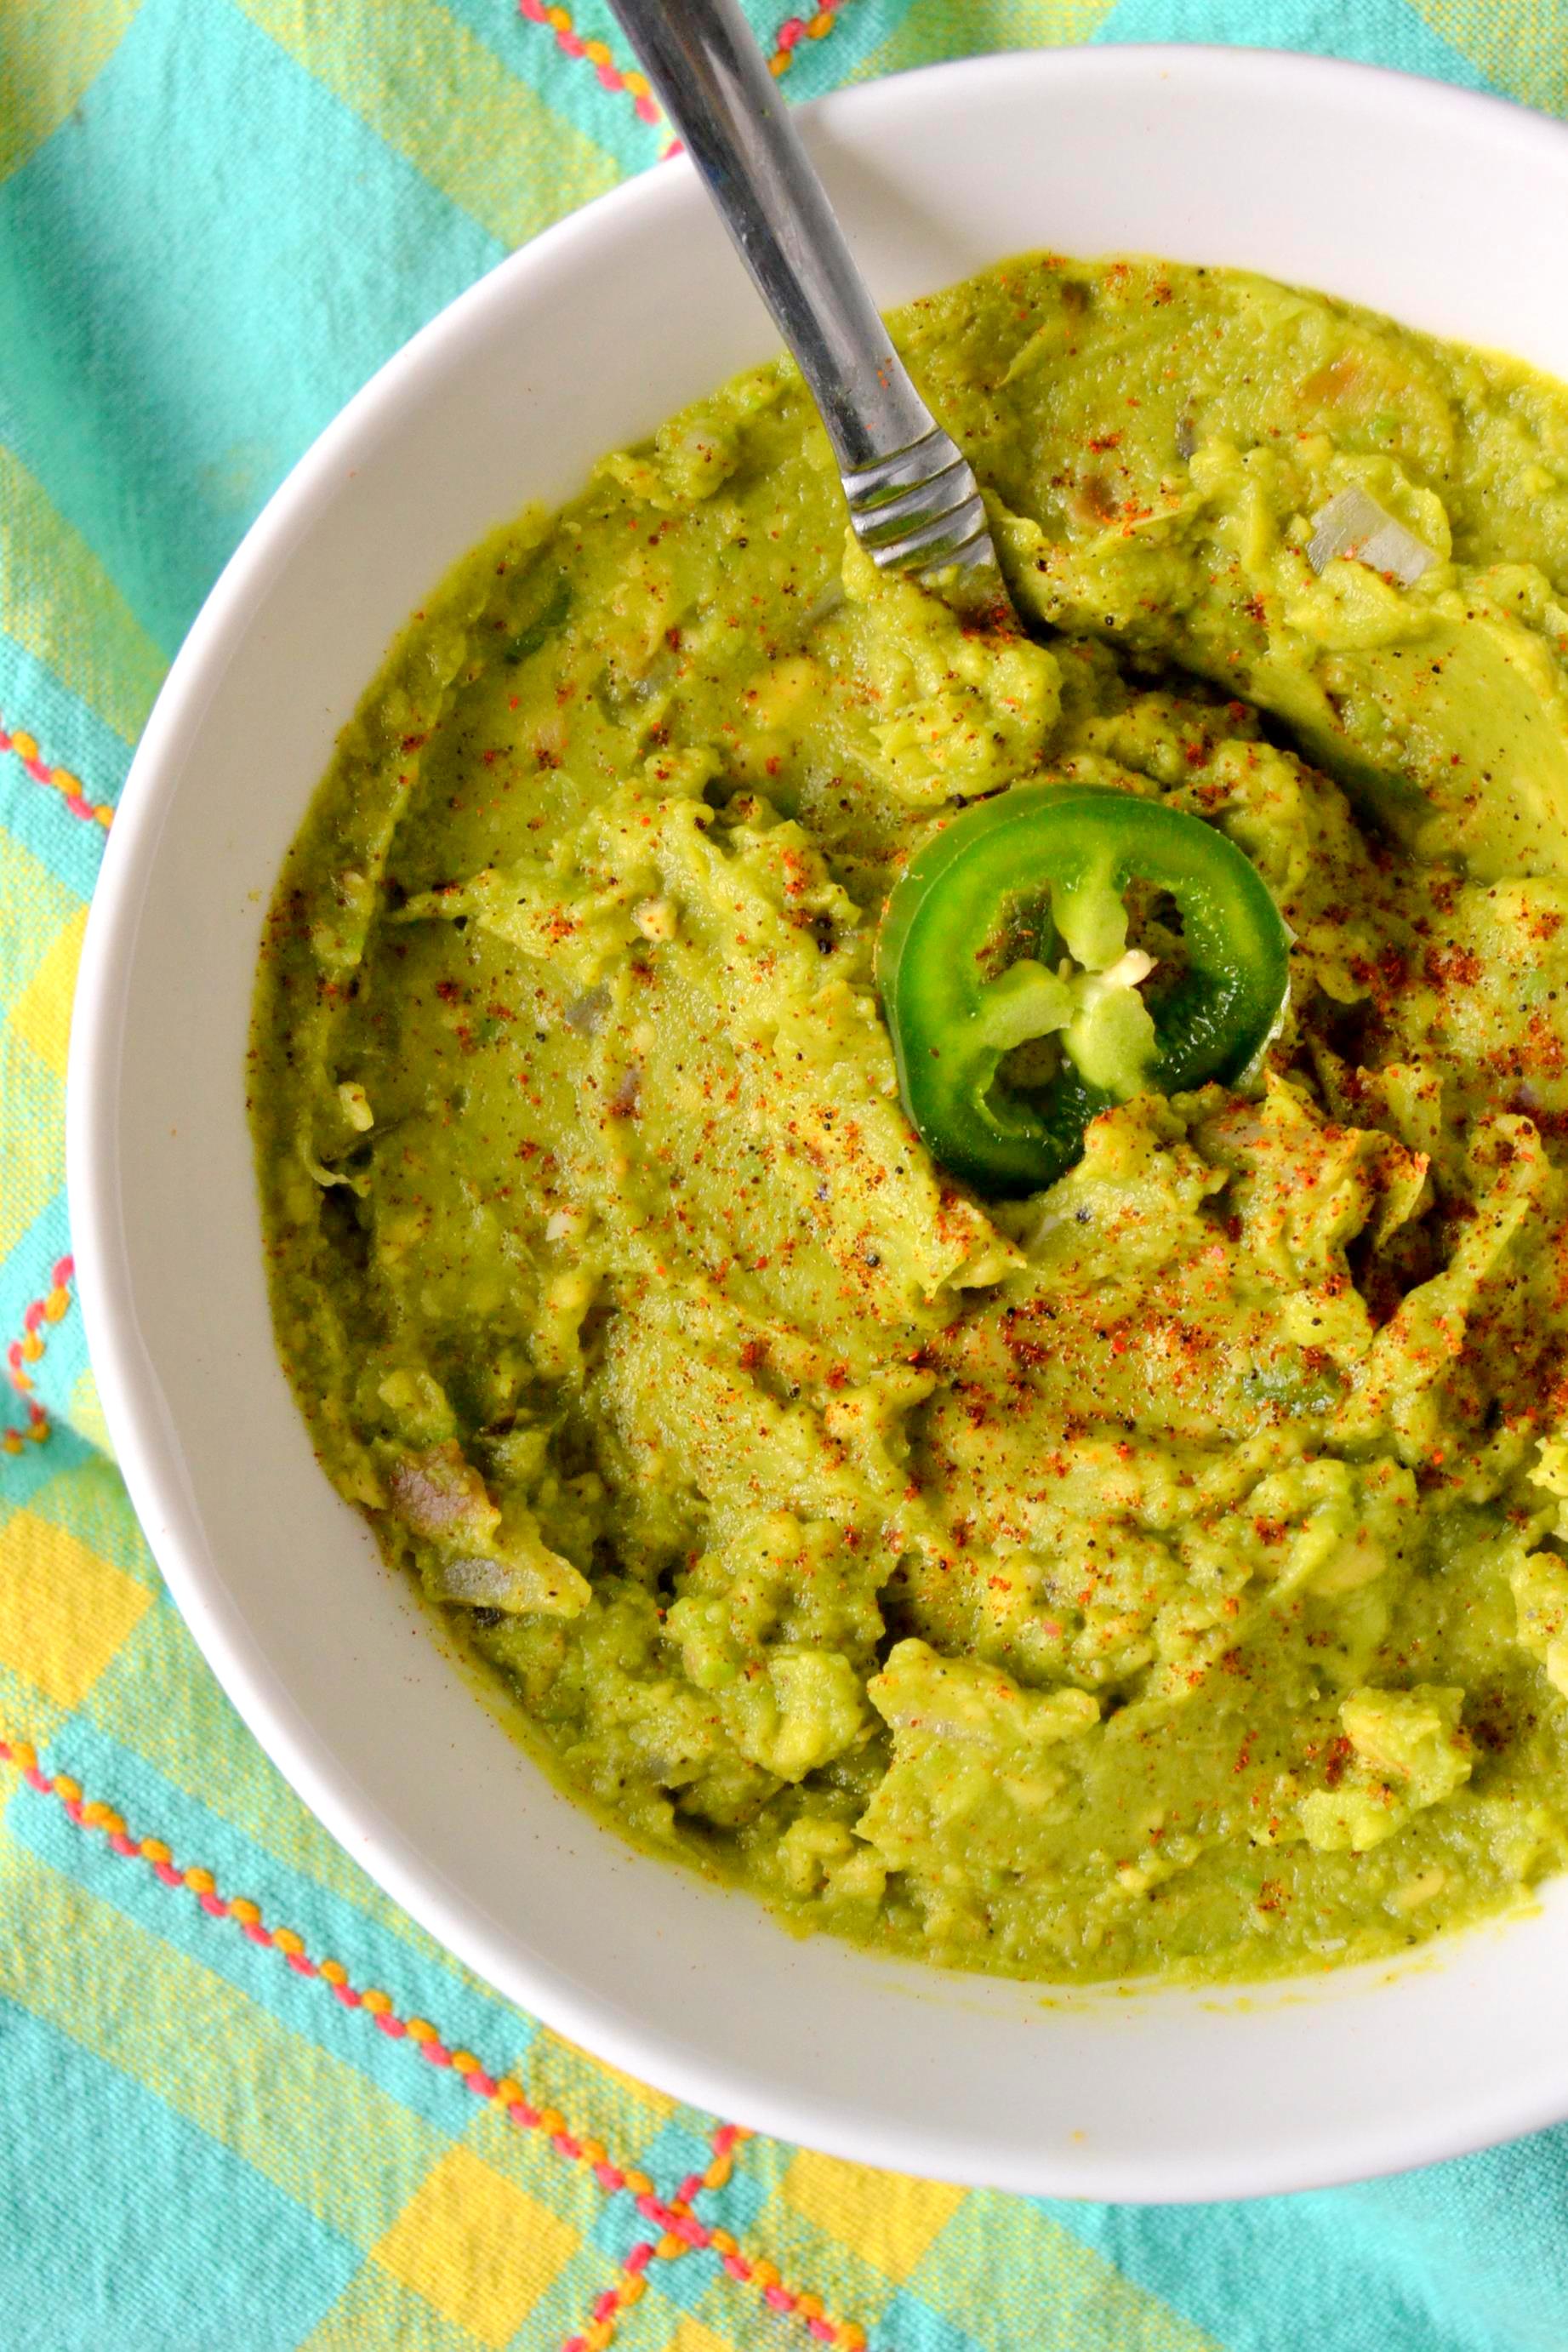 Grilled Chipotle Guacamole